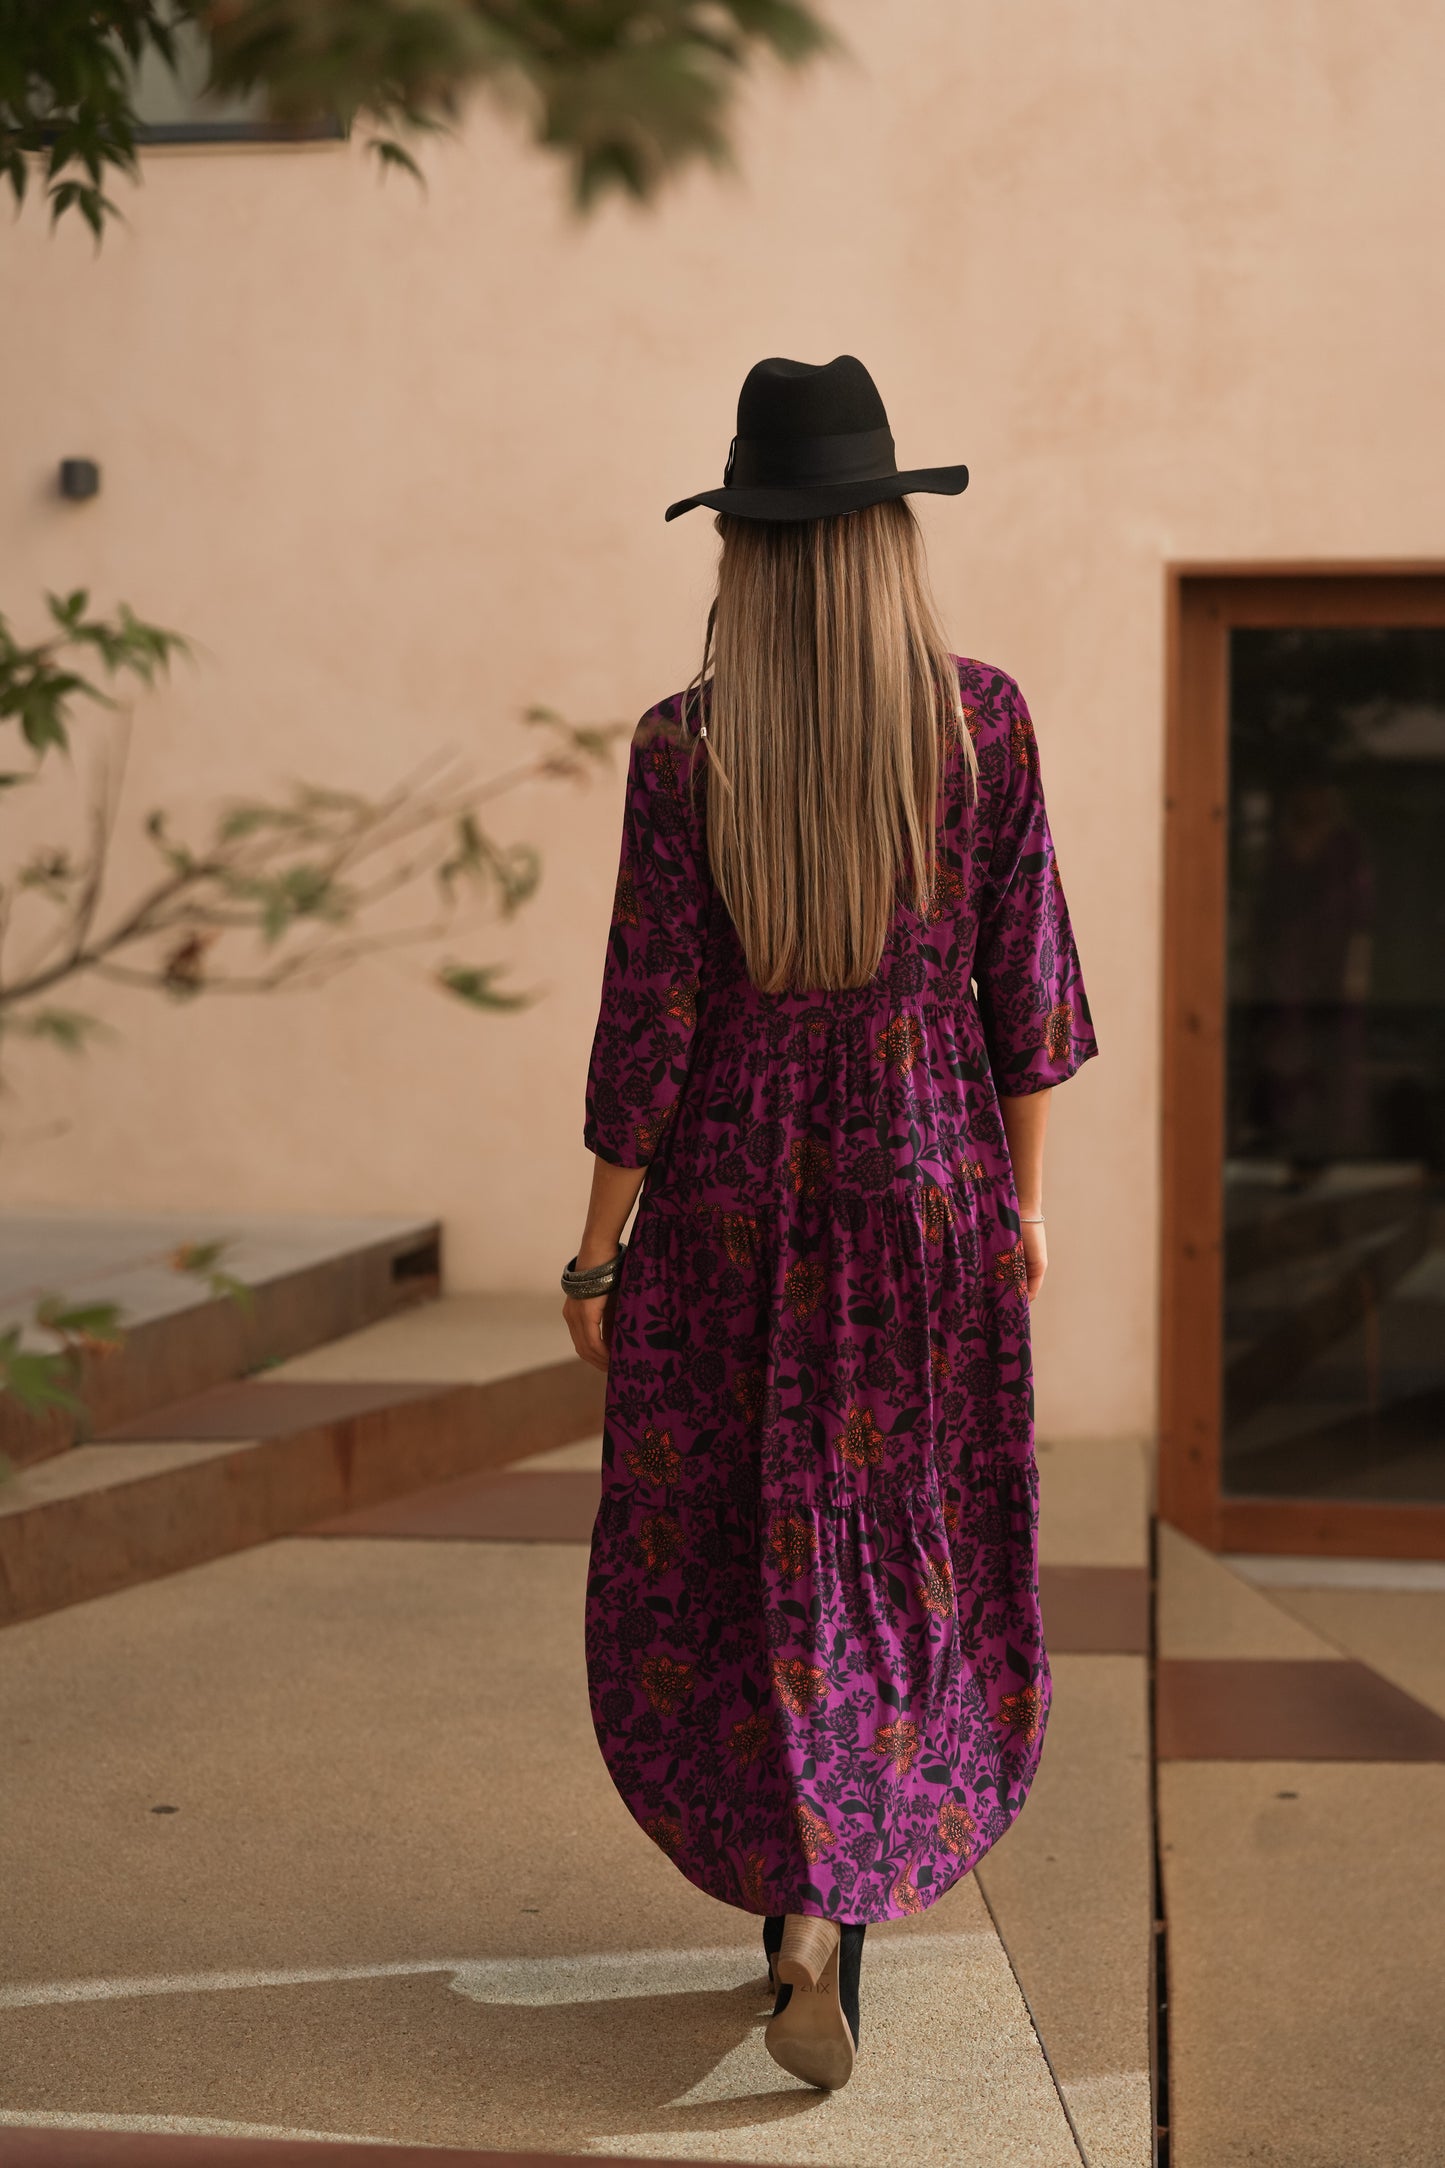 Long dress with floral print